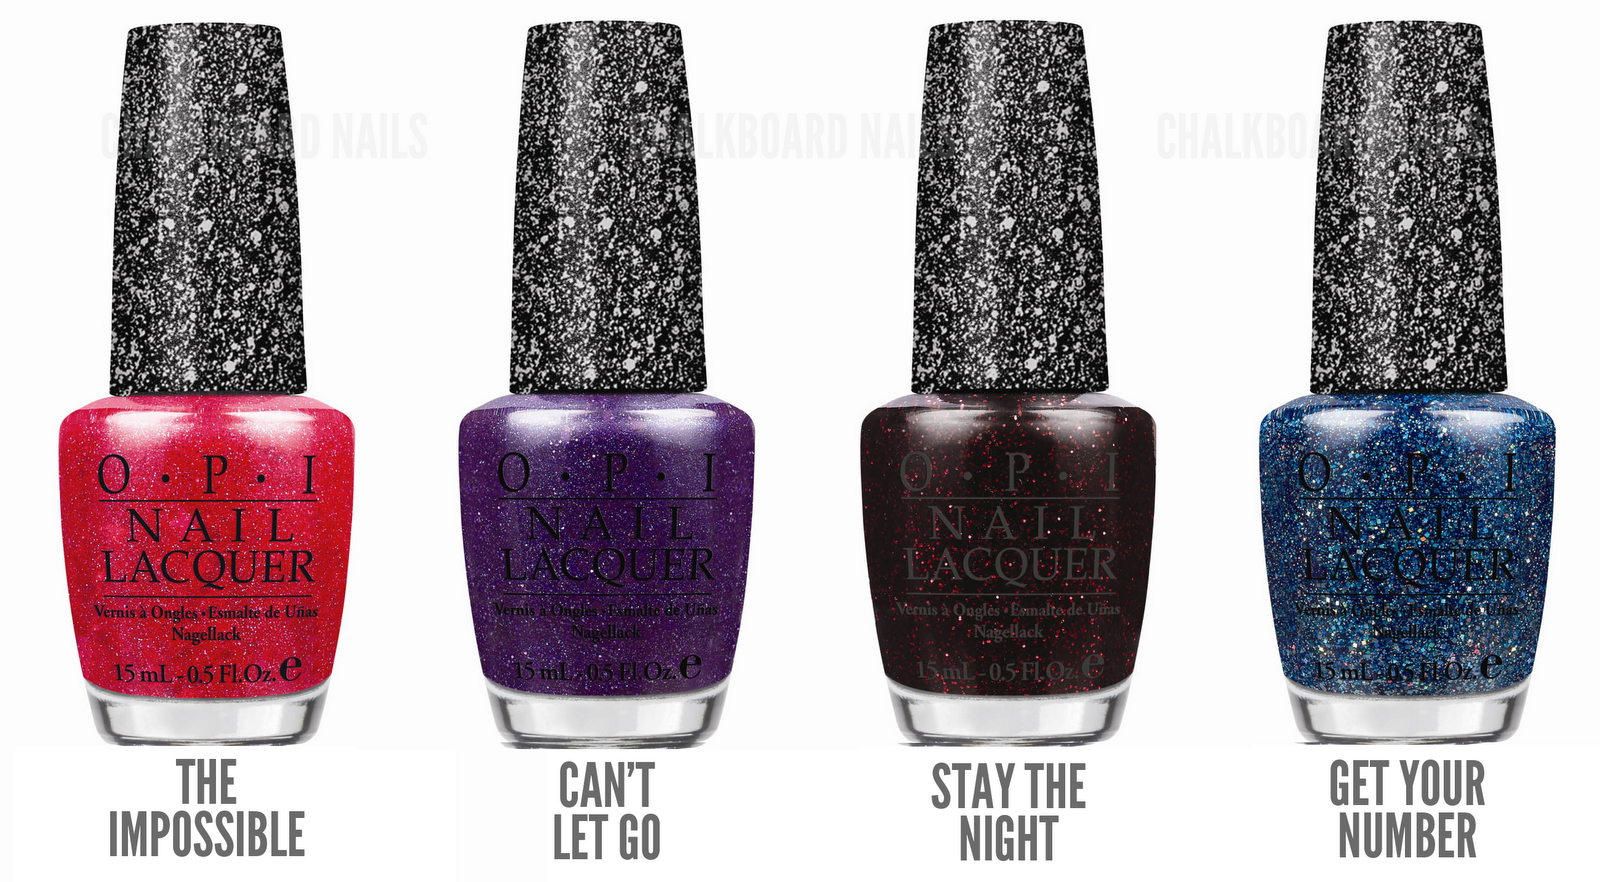 1. OPI Liquid Sand Nail Polish in "Can't Let Go" - wide 5